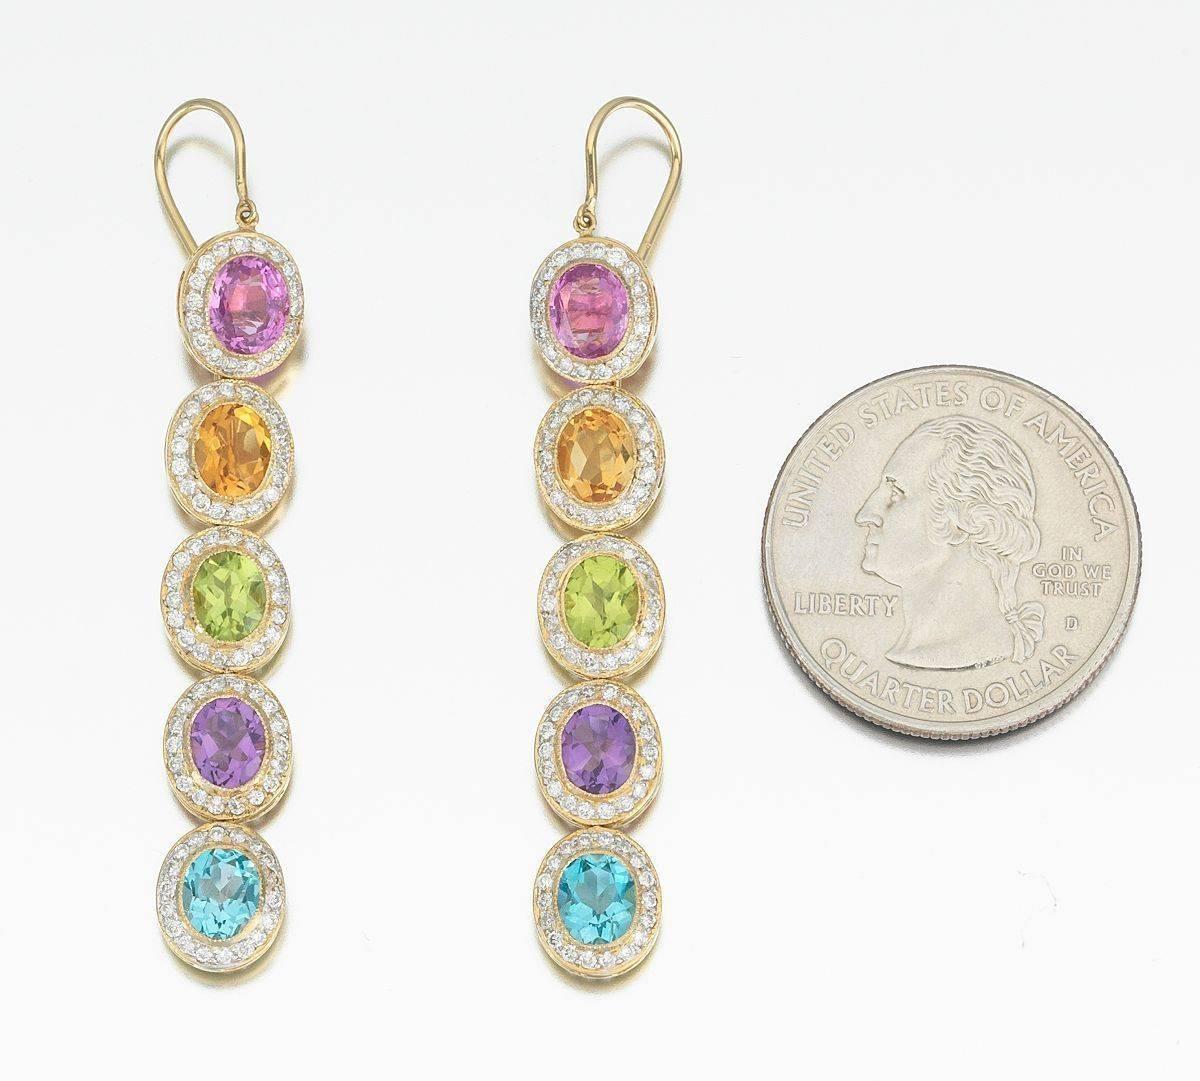 Striking and colorful jewelry set consisting of an 18k yellow gold pendant and earrings set with gemstones including: tourmaline, citrine, peridot, amethyst and topaz.  Each gemstone is 6mm x 8mm, all surrounded by a halo of brilliant cut diamonds. 